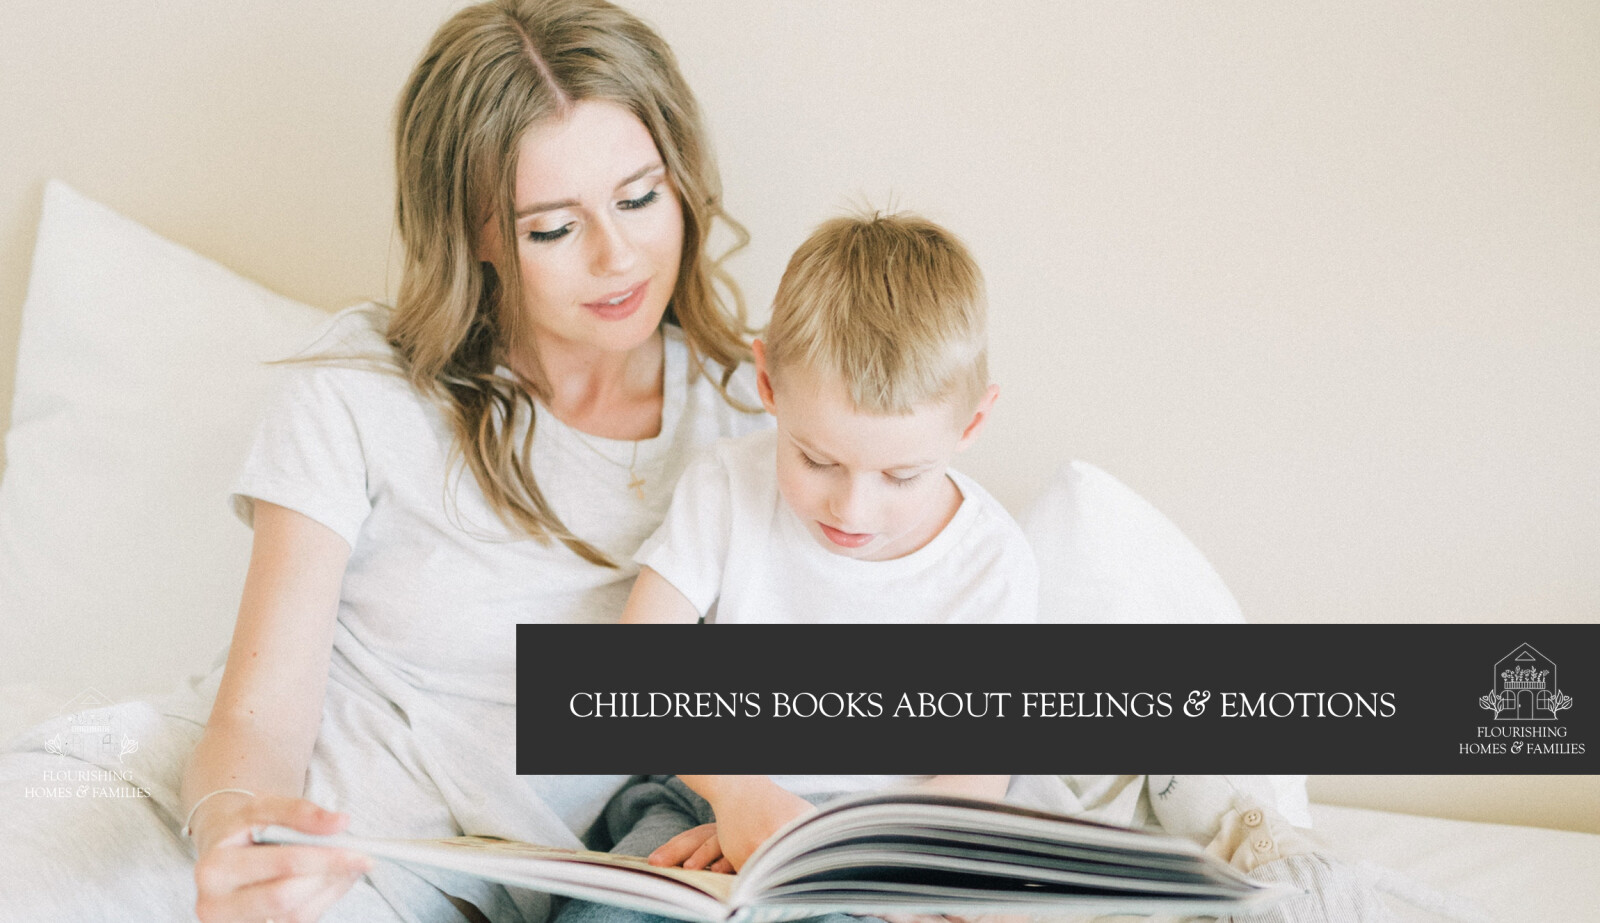 CHILDREN'S BOOKS ABOUT FEELINGS AND EMOTIONS